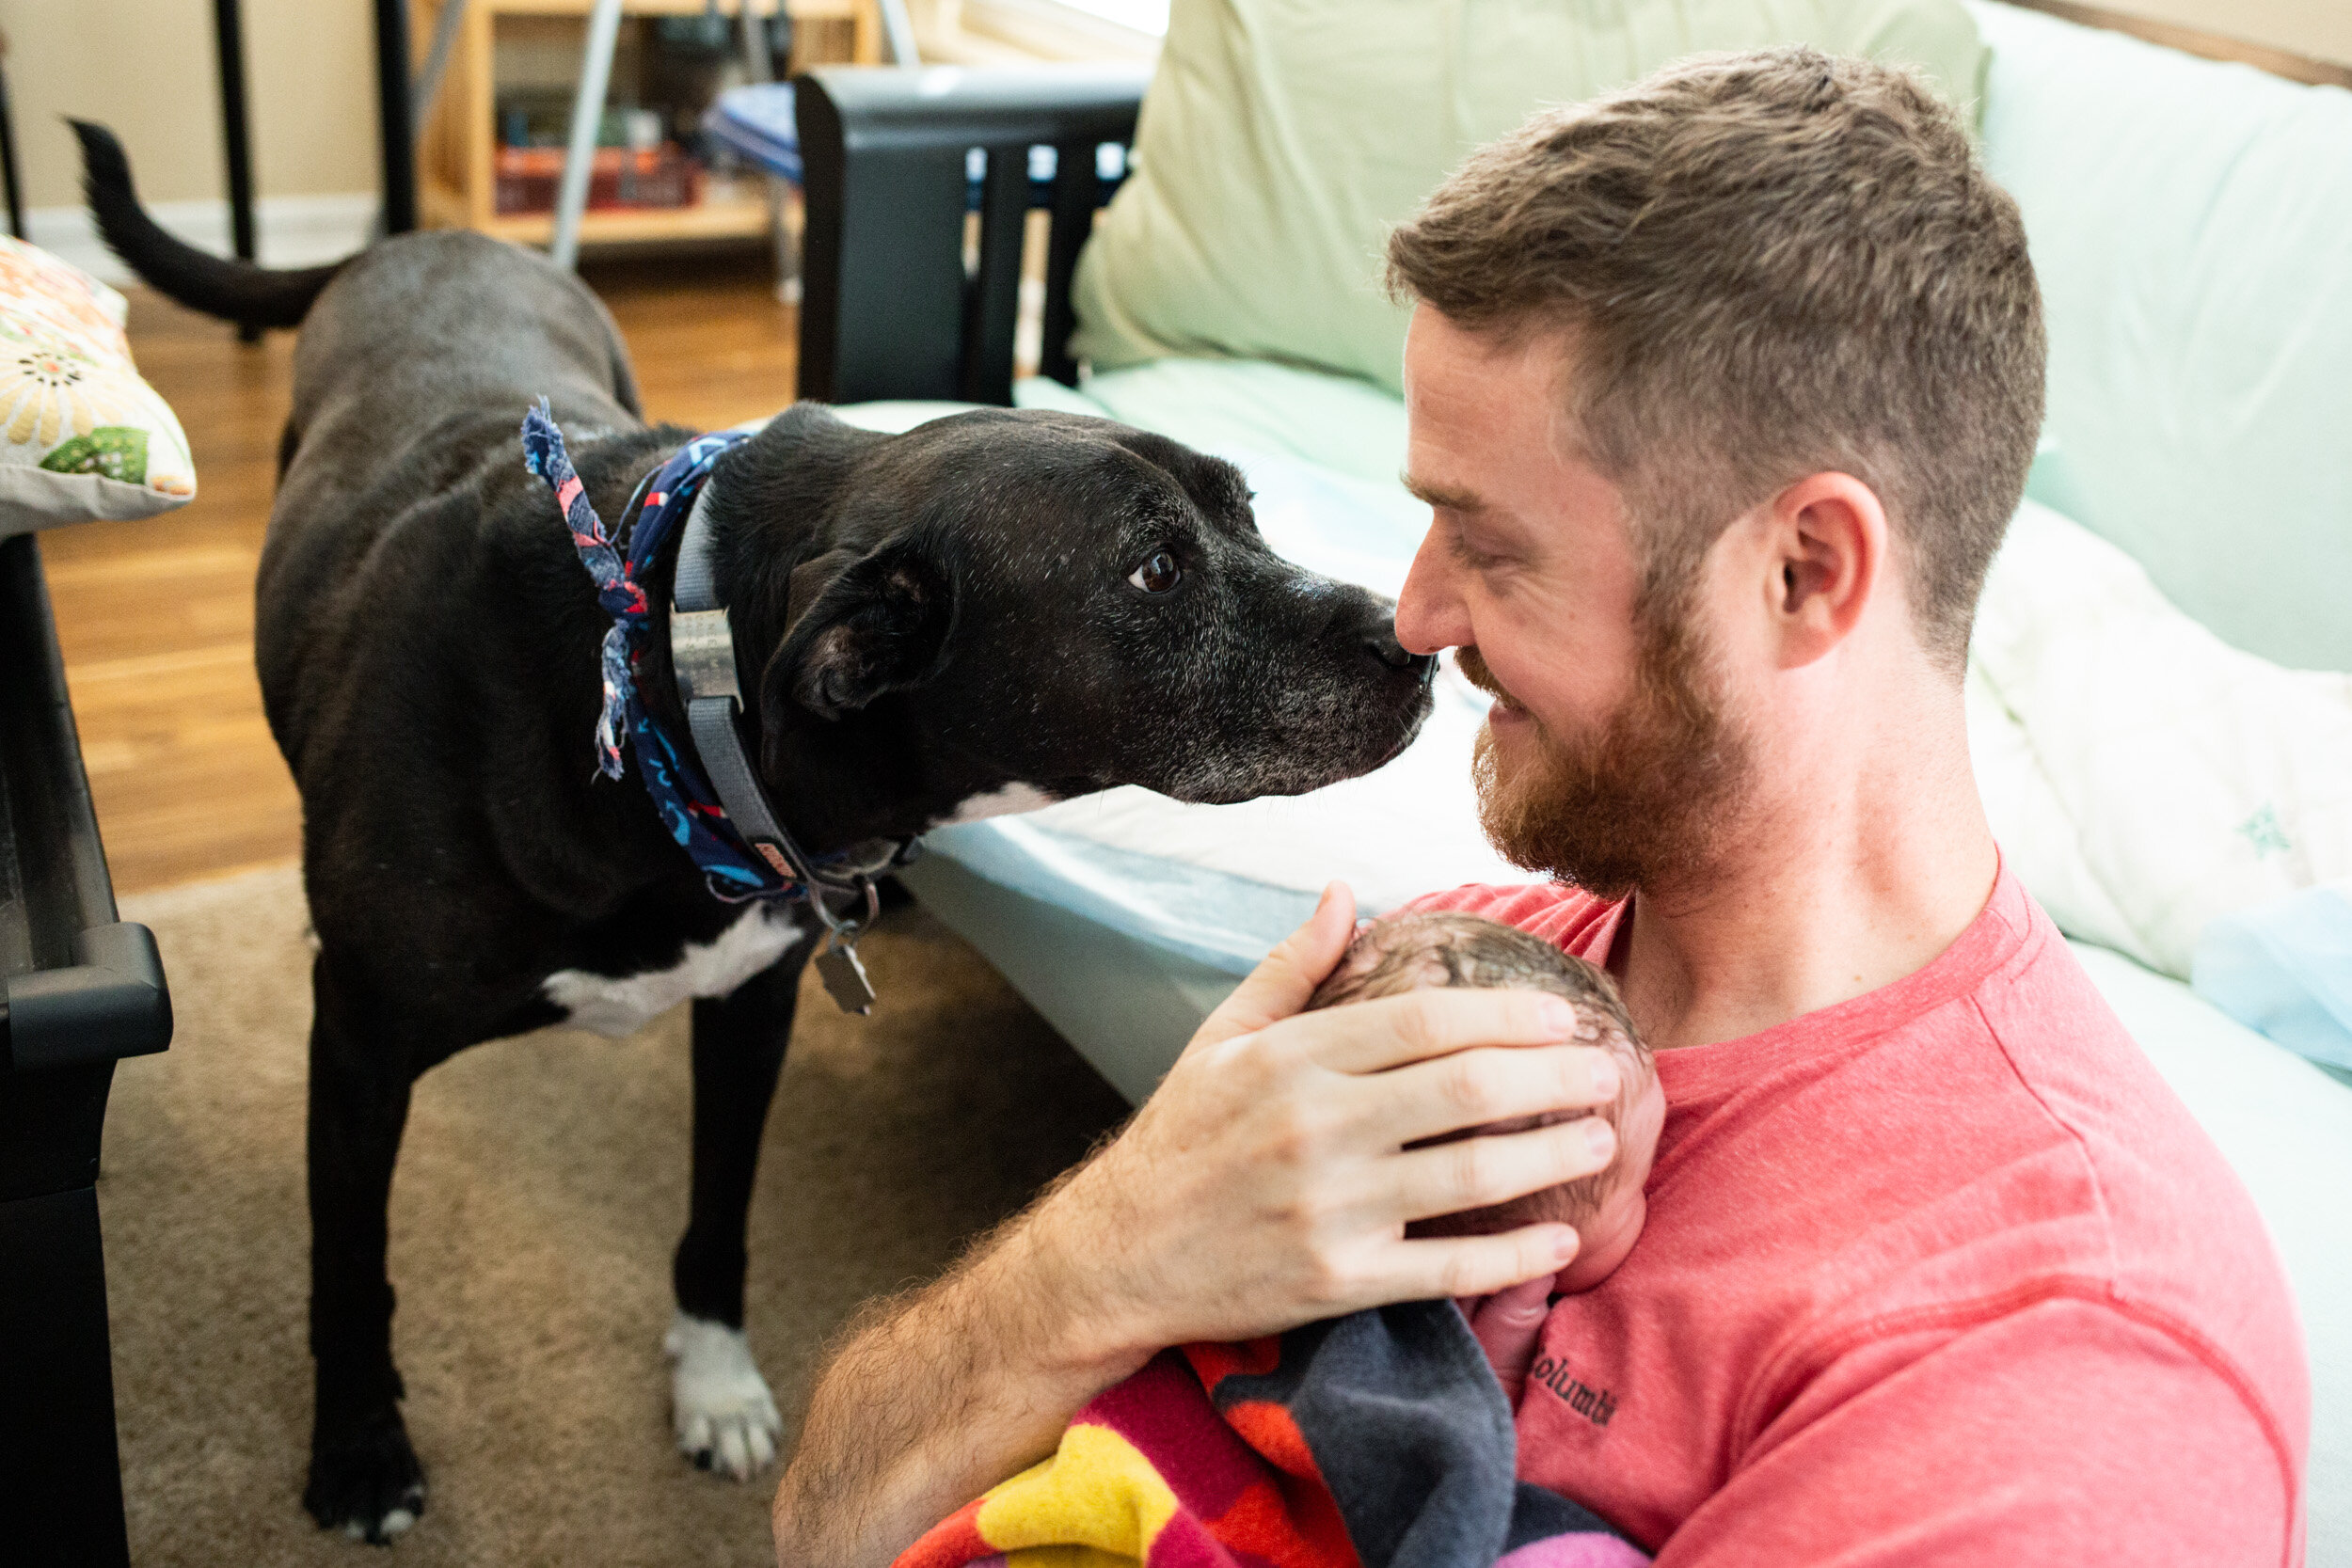 dog nose-to-nose with dad holding newborn